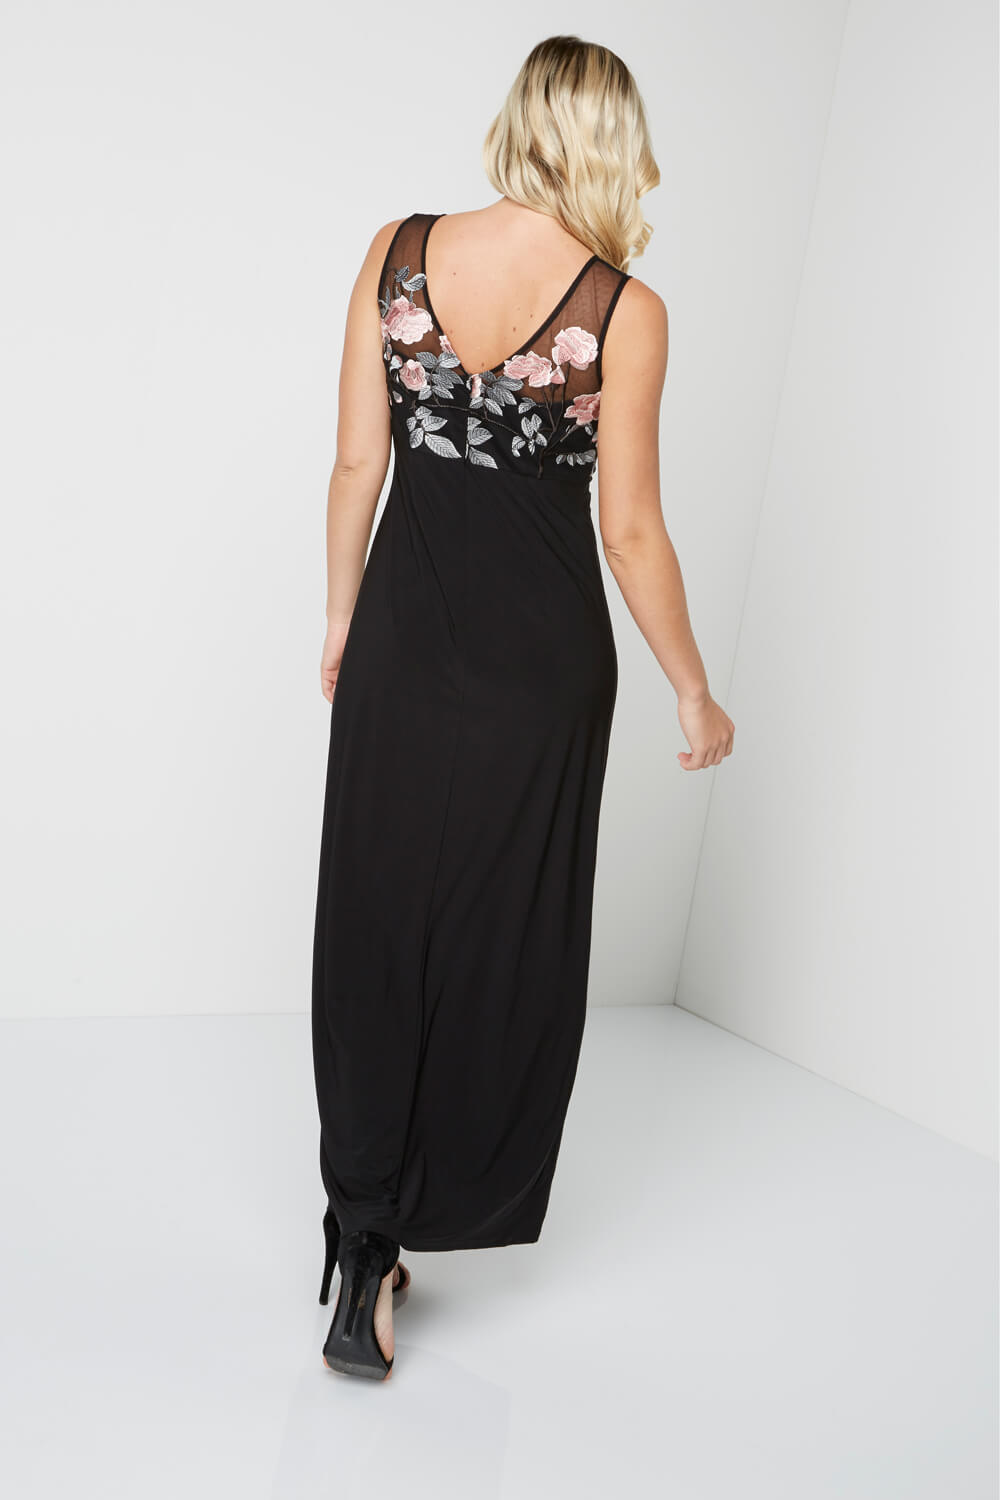 Black Rose Embroidered Maxi Dress, Image 2 of 4